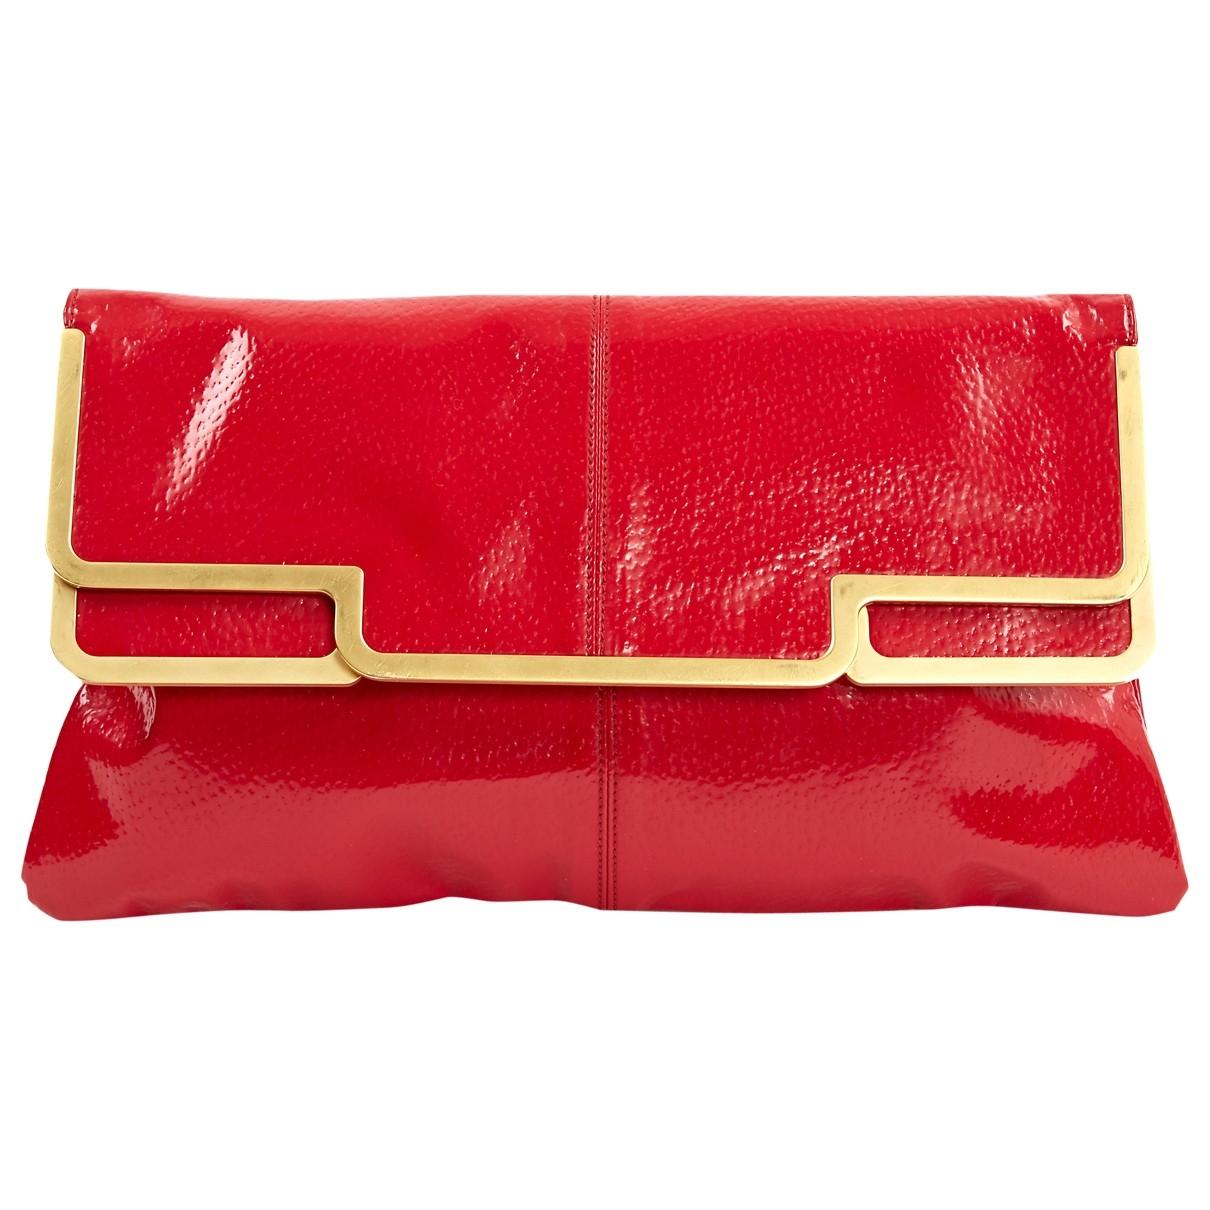 Stella McCartney Red Patent Leather Clutch Bag in Red - Lyst